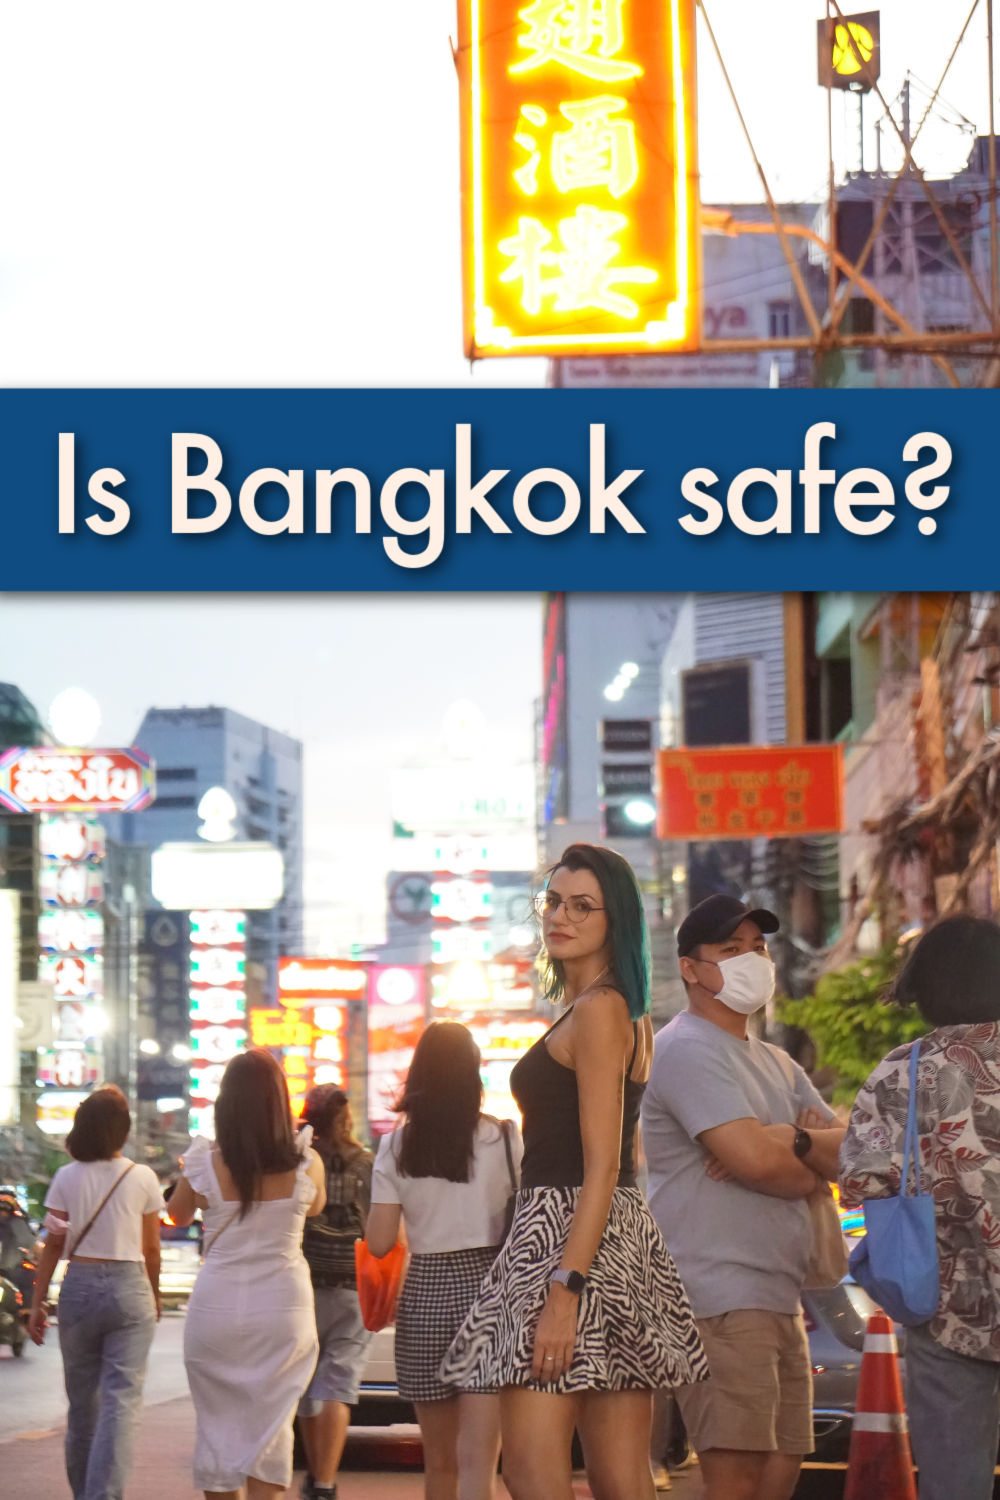 All you need to know about Bangkok safety, Thailand, is here! We answer these and more:-Is Bangkok safe?-What are Bangkok's dangers, and how to avoid them?-Is Bangkok safe for female solo travelers?-What are the most common scams in Bangkok?-How are parties, drinks/drugs in Bangkok?-How to get around Bangkok and Thailand safely?-Can I drink tap water in Thailand?-Is it safe to eat street food in Bangkok?The ultimate guide to traveling to Bangkok safely and having fun.